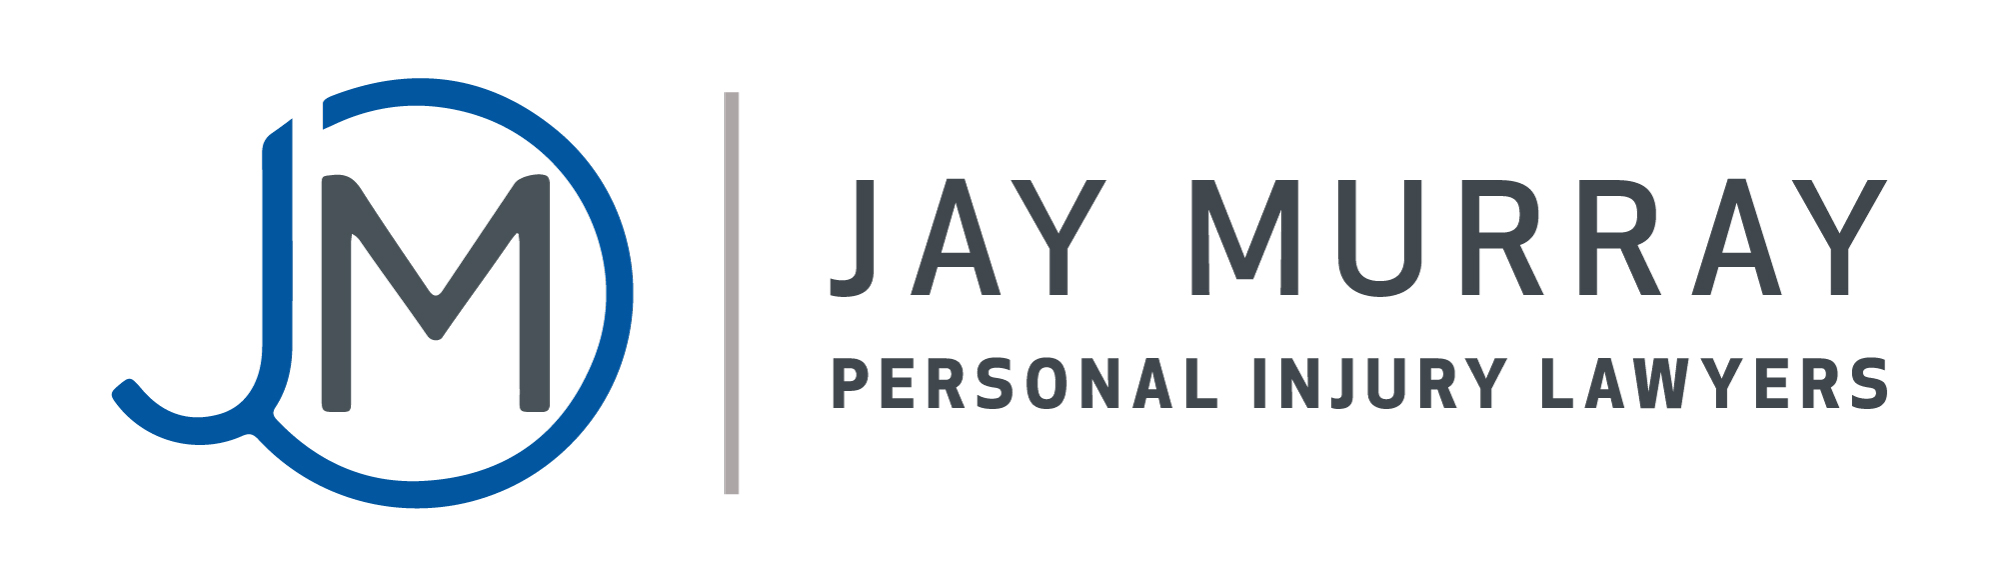 Jay Murray Personal Injury Lawyers Profile Picture